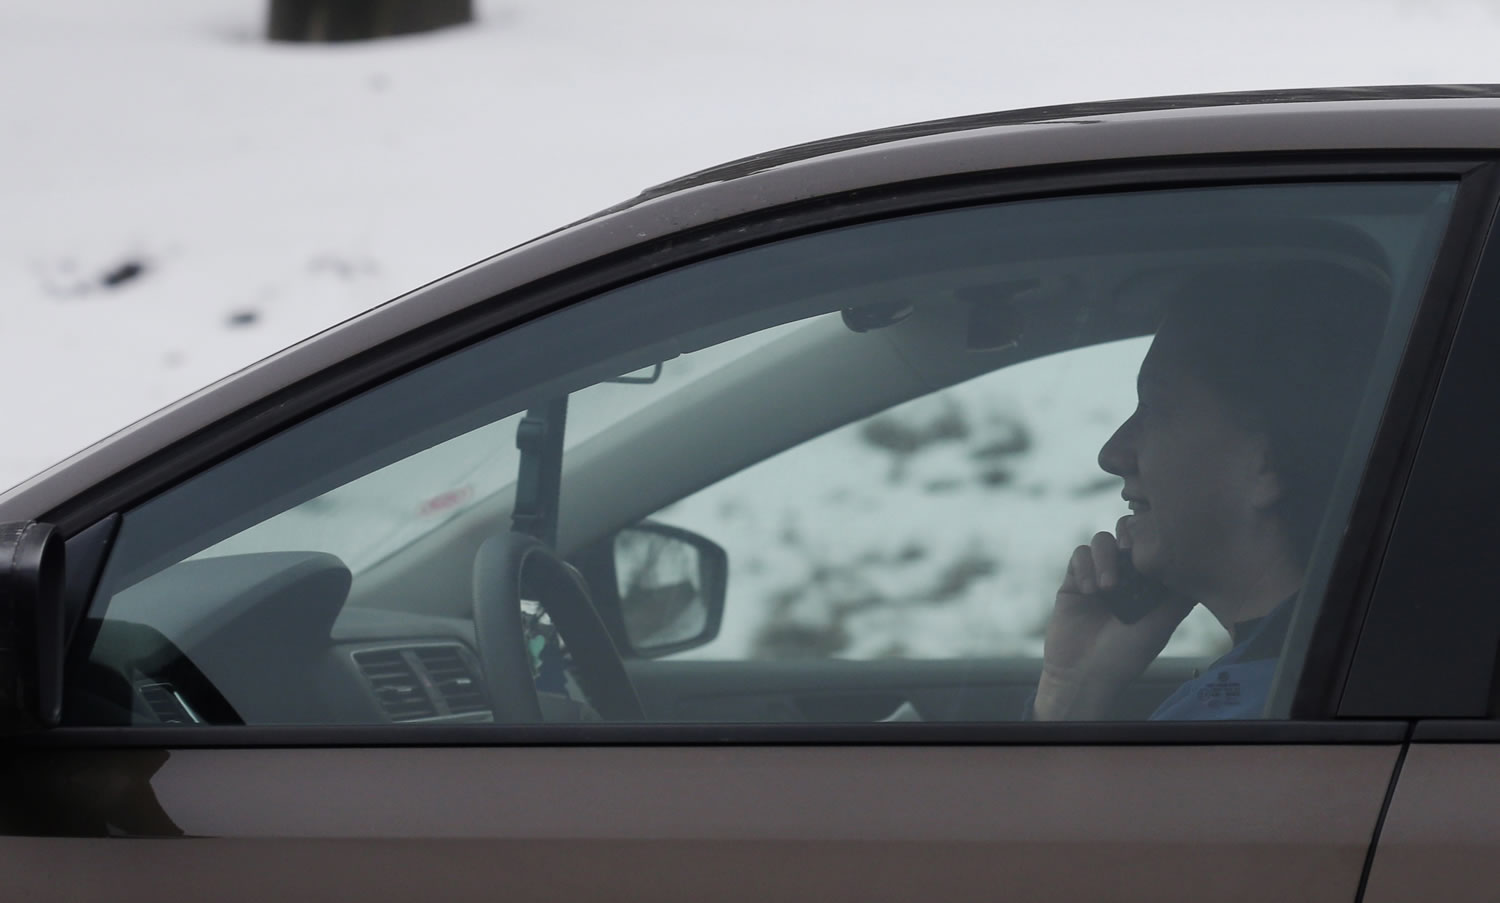 A motorist talks on a cell phone while driving on an expressway in Chicago.